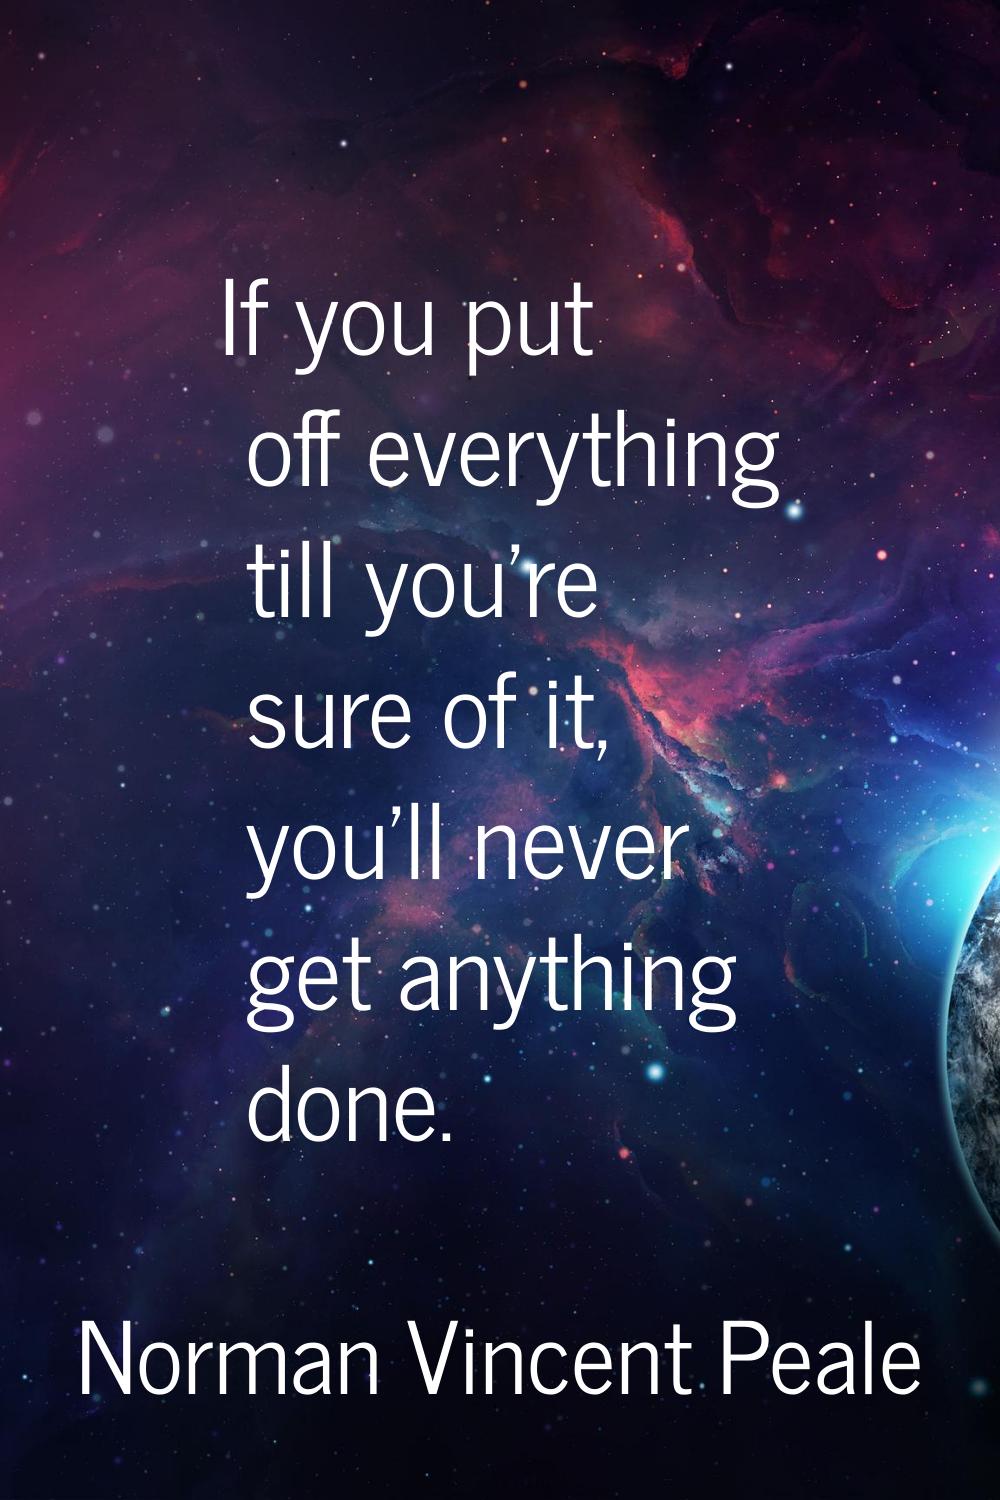 If you put off everything till you're sure of it, you'll never get anything done.